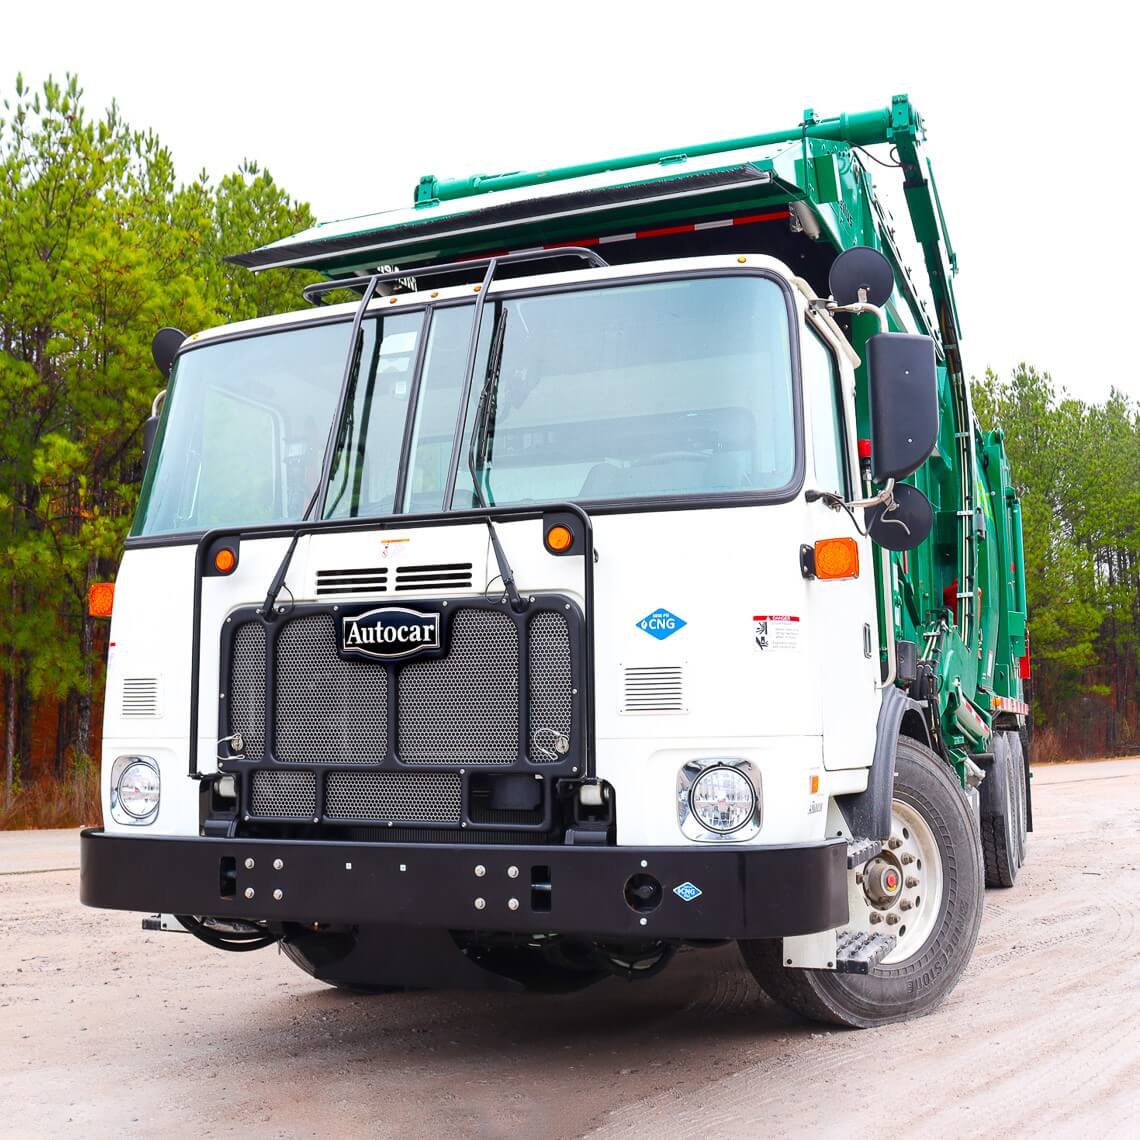 The ACX severe duty front-end loader with green body parked on a dirt road. 